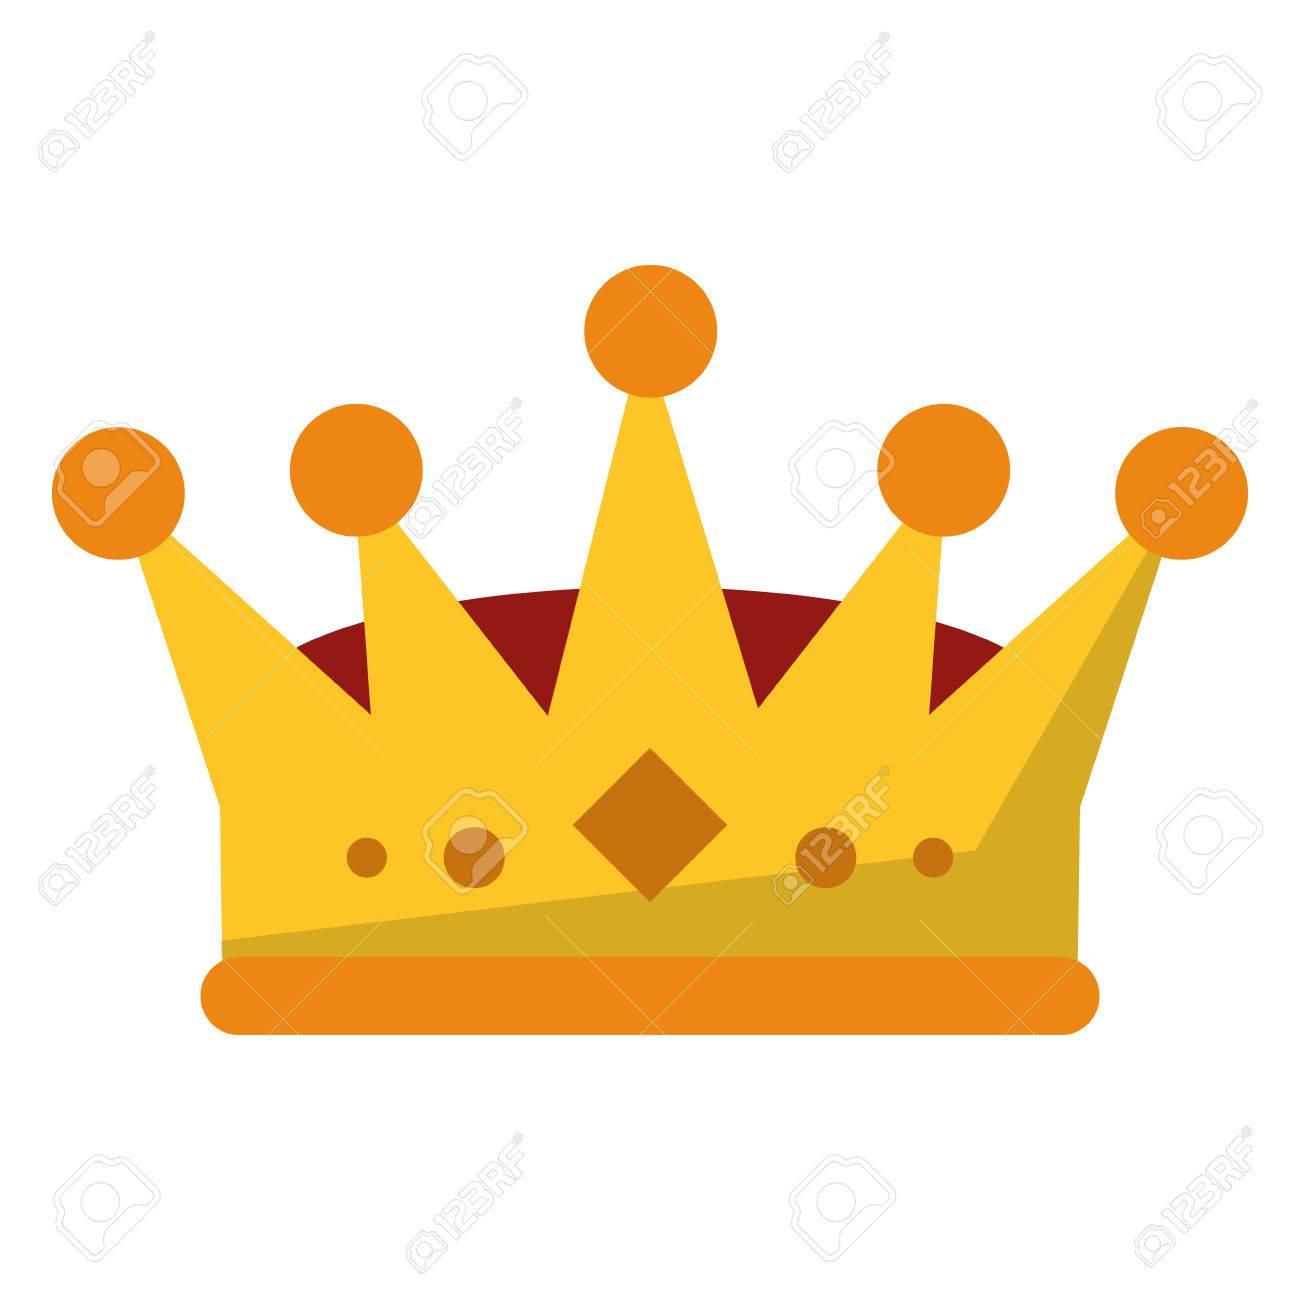 King crown Icons - 705 free vector icons